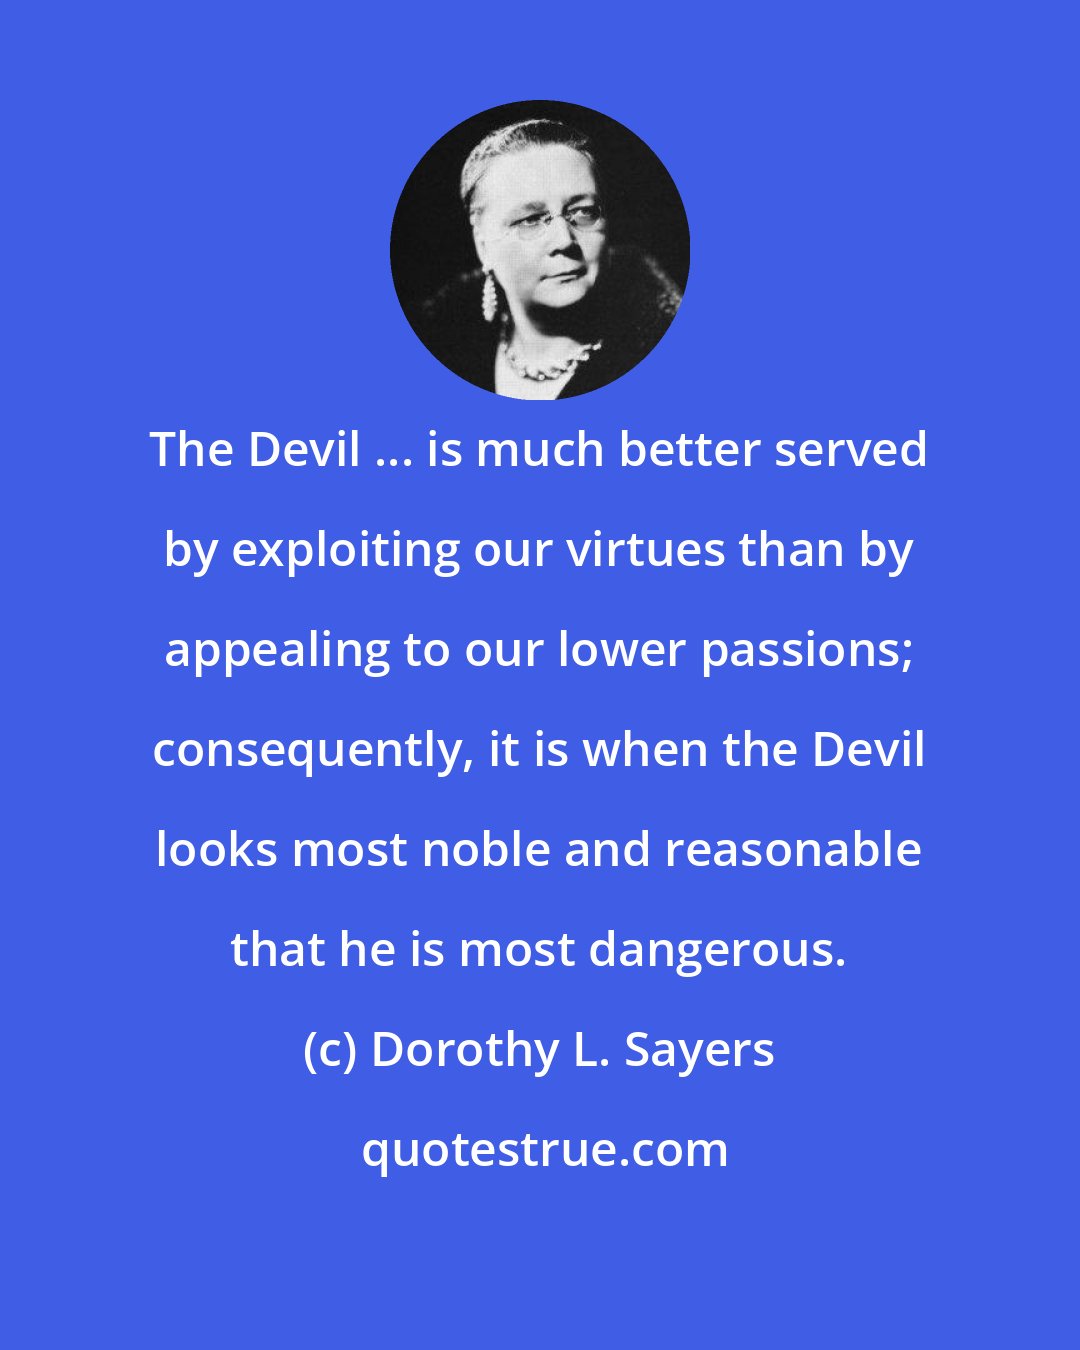 Dorothy L. Sayers: The Devil ... is much better served by exploiting our virtues than by appealing to our lower passions; consequently, it is when the Devil looks most noble and reasonable that he is most dangerous.